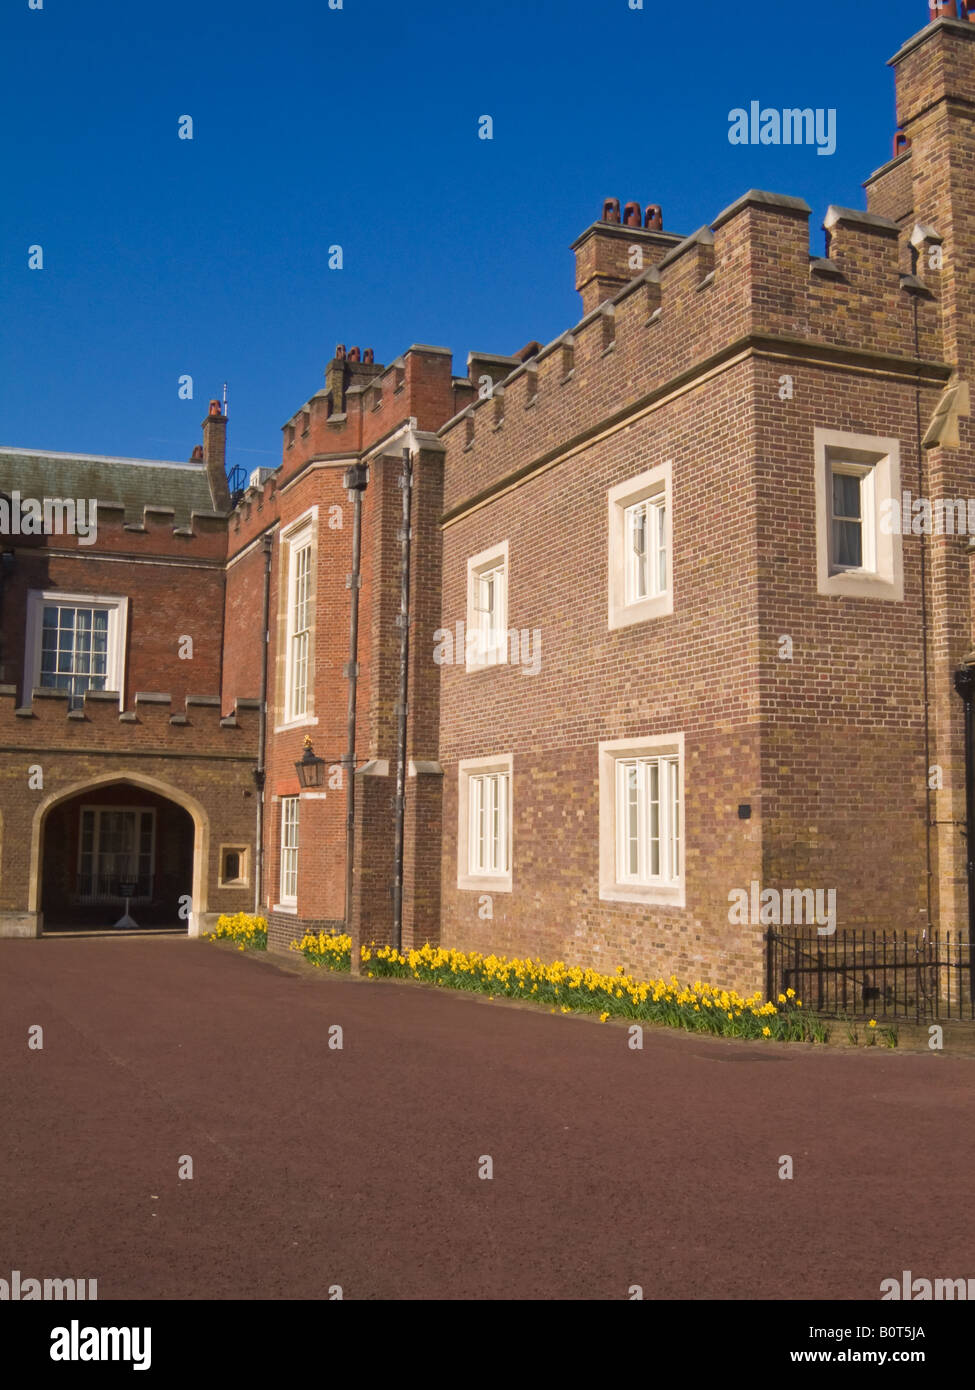 St James s Palace City of Westminster Londra Inghilterra REGNO UNITO Foto Stock